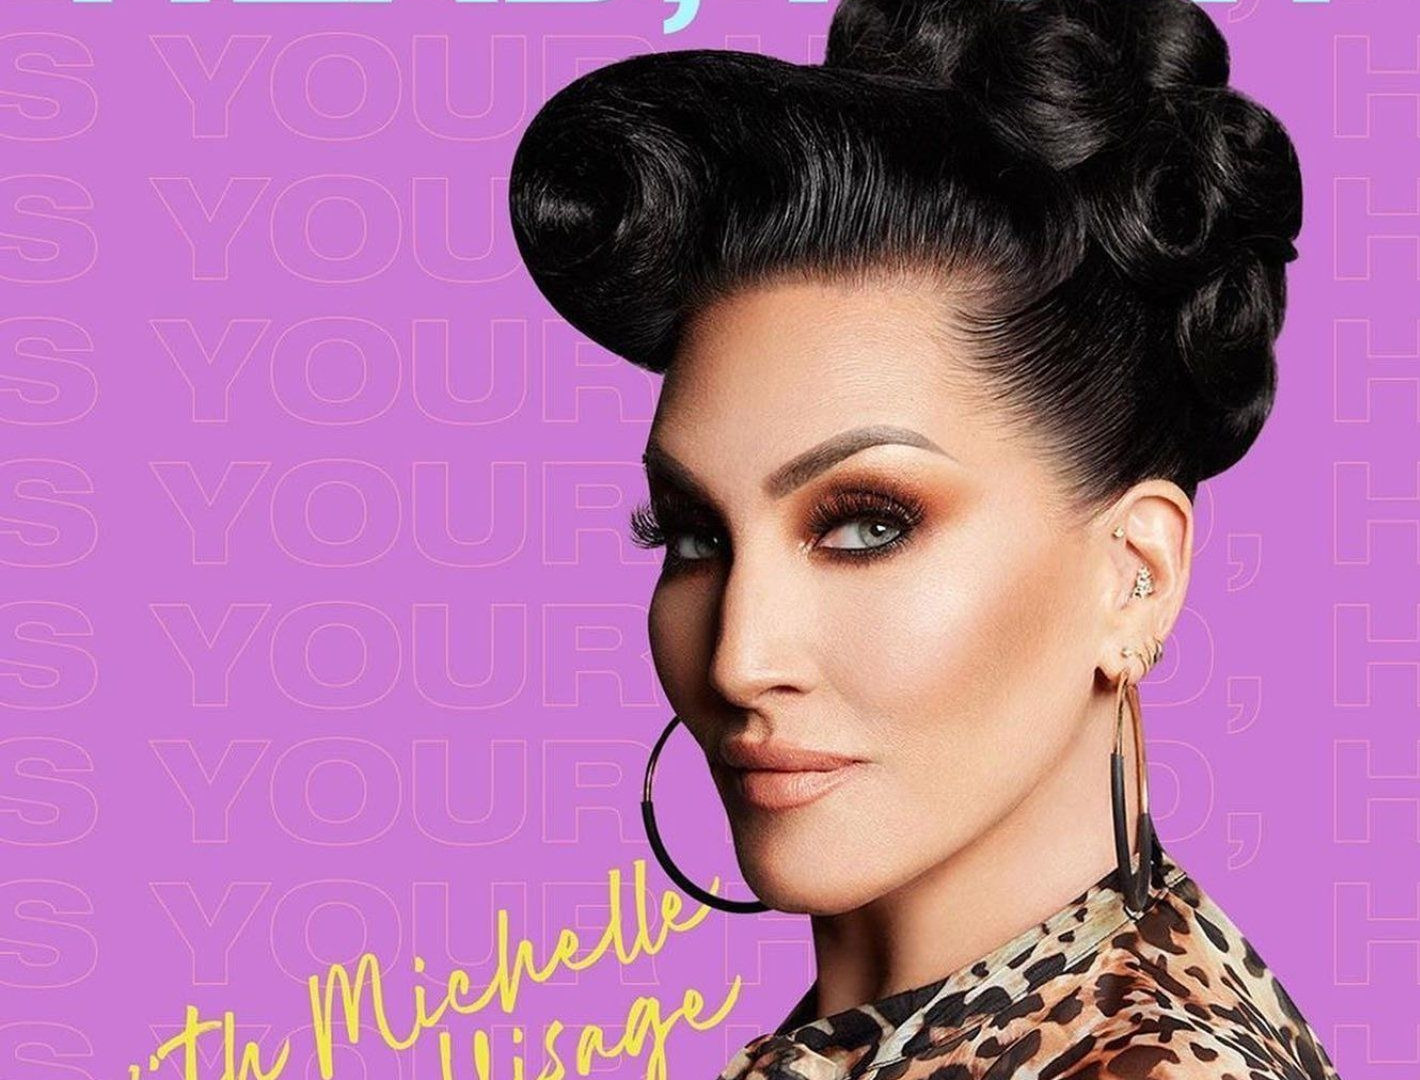 Show How's Your Head, Hun? with Michelle Visage